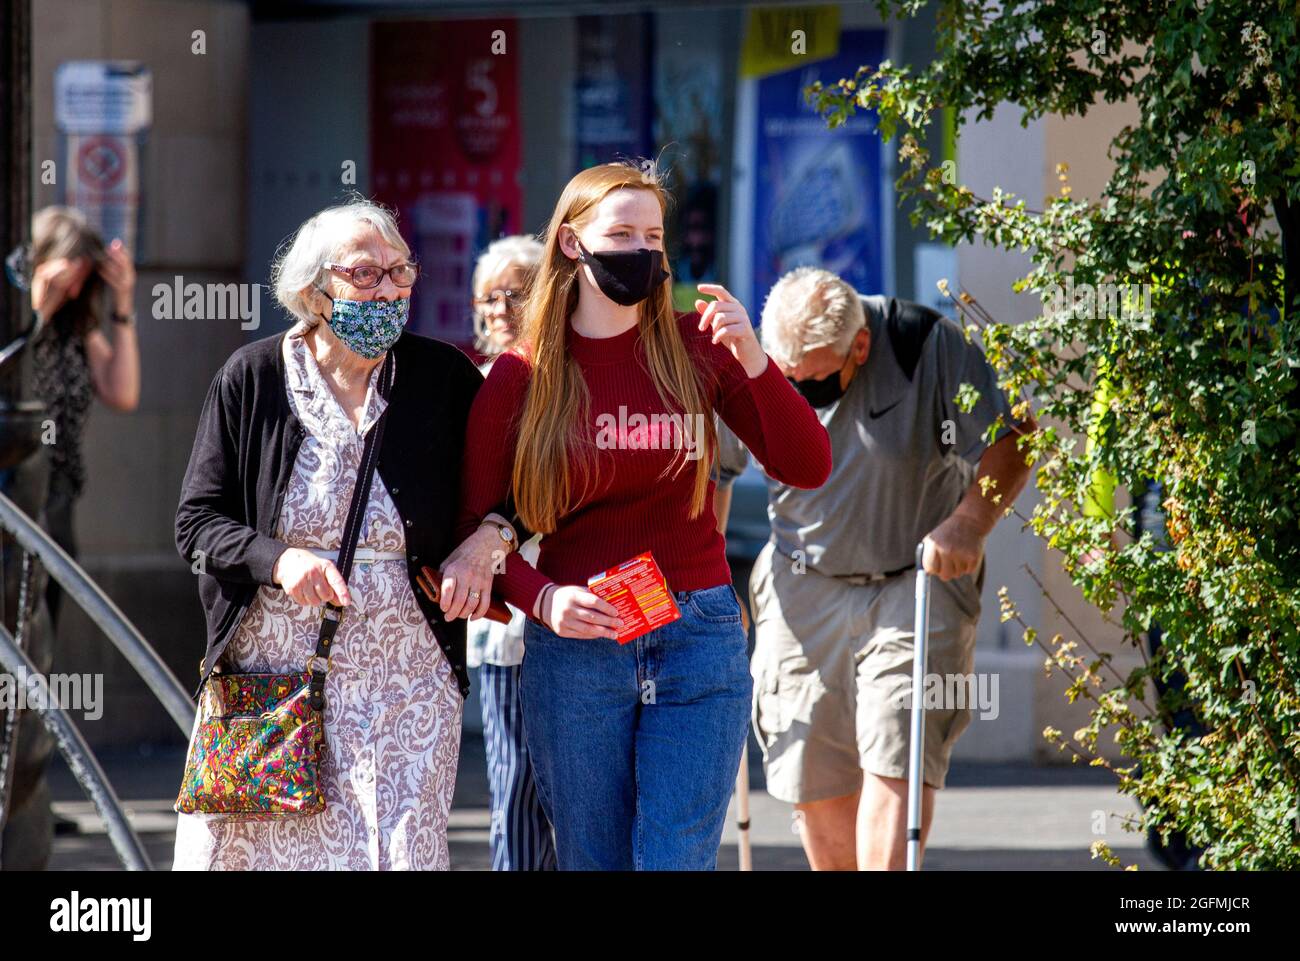 Dundee, Tayside, Scotland, UK. 26th Aug, 2021. UK Weather: A warm sunny day with a slight cool breeze across North East Scotland with temperatures reaching 20°C. A young woman with her grandmother wearing facemasks walking arm in arm in the warm sunshine whilst enjoying a day out in Dundee city centre. Credit: Dundee Photographics/Alamy Live News Stock Photo